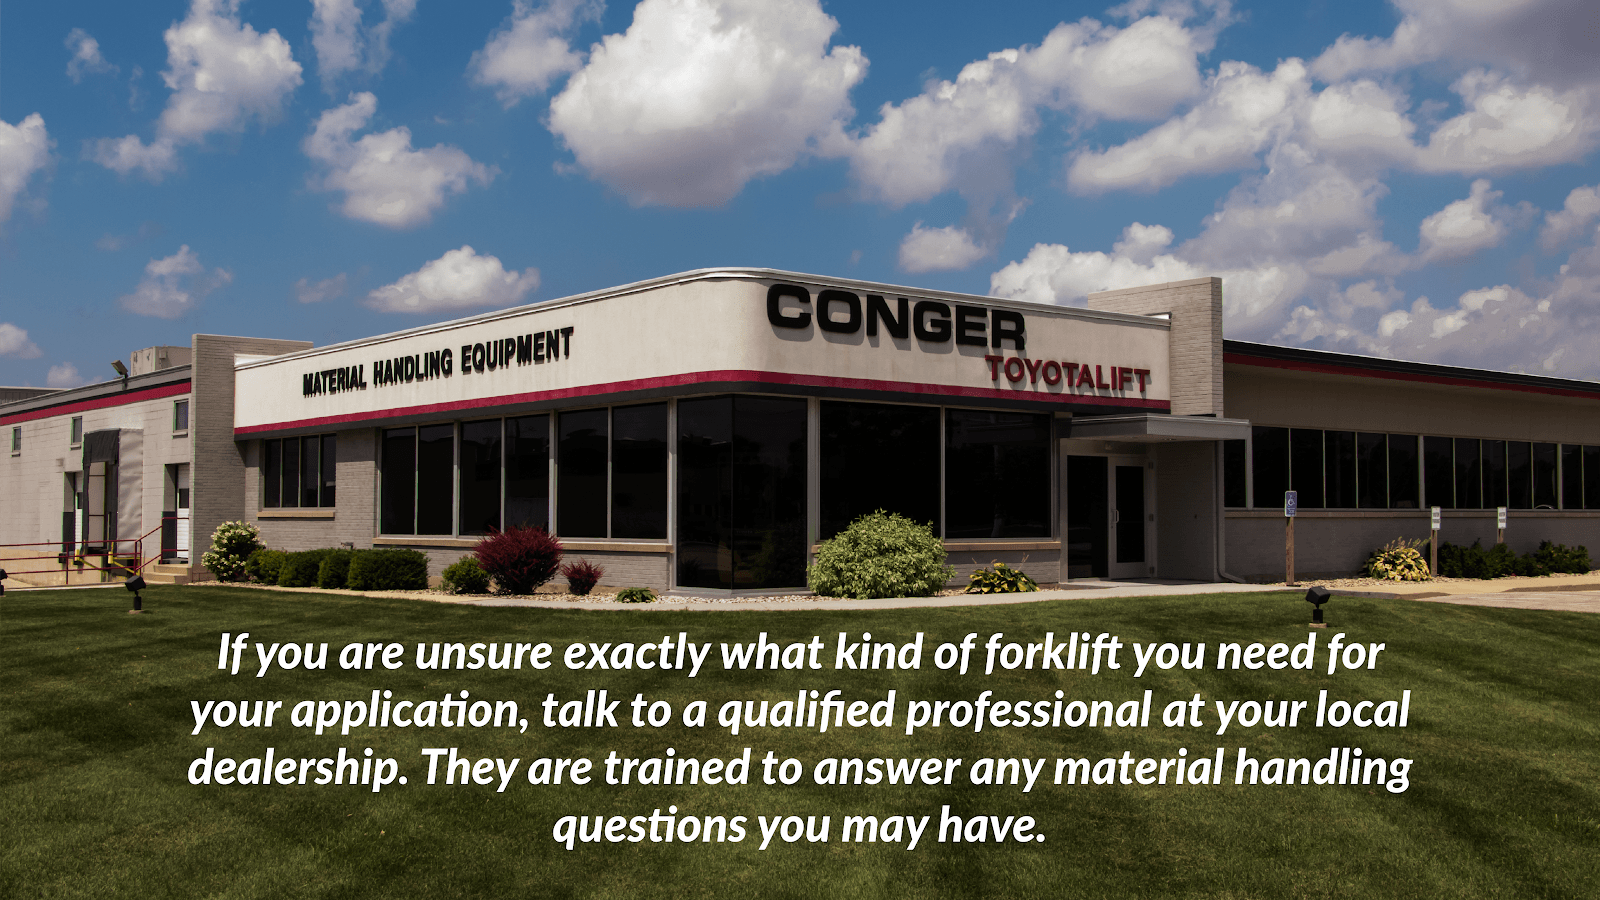 If you are unsure exactly what kind of lift you need for your application, talk to a qualified professional at your local dealership. They are trained to answer any material handling questions you may have.